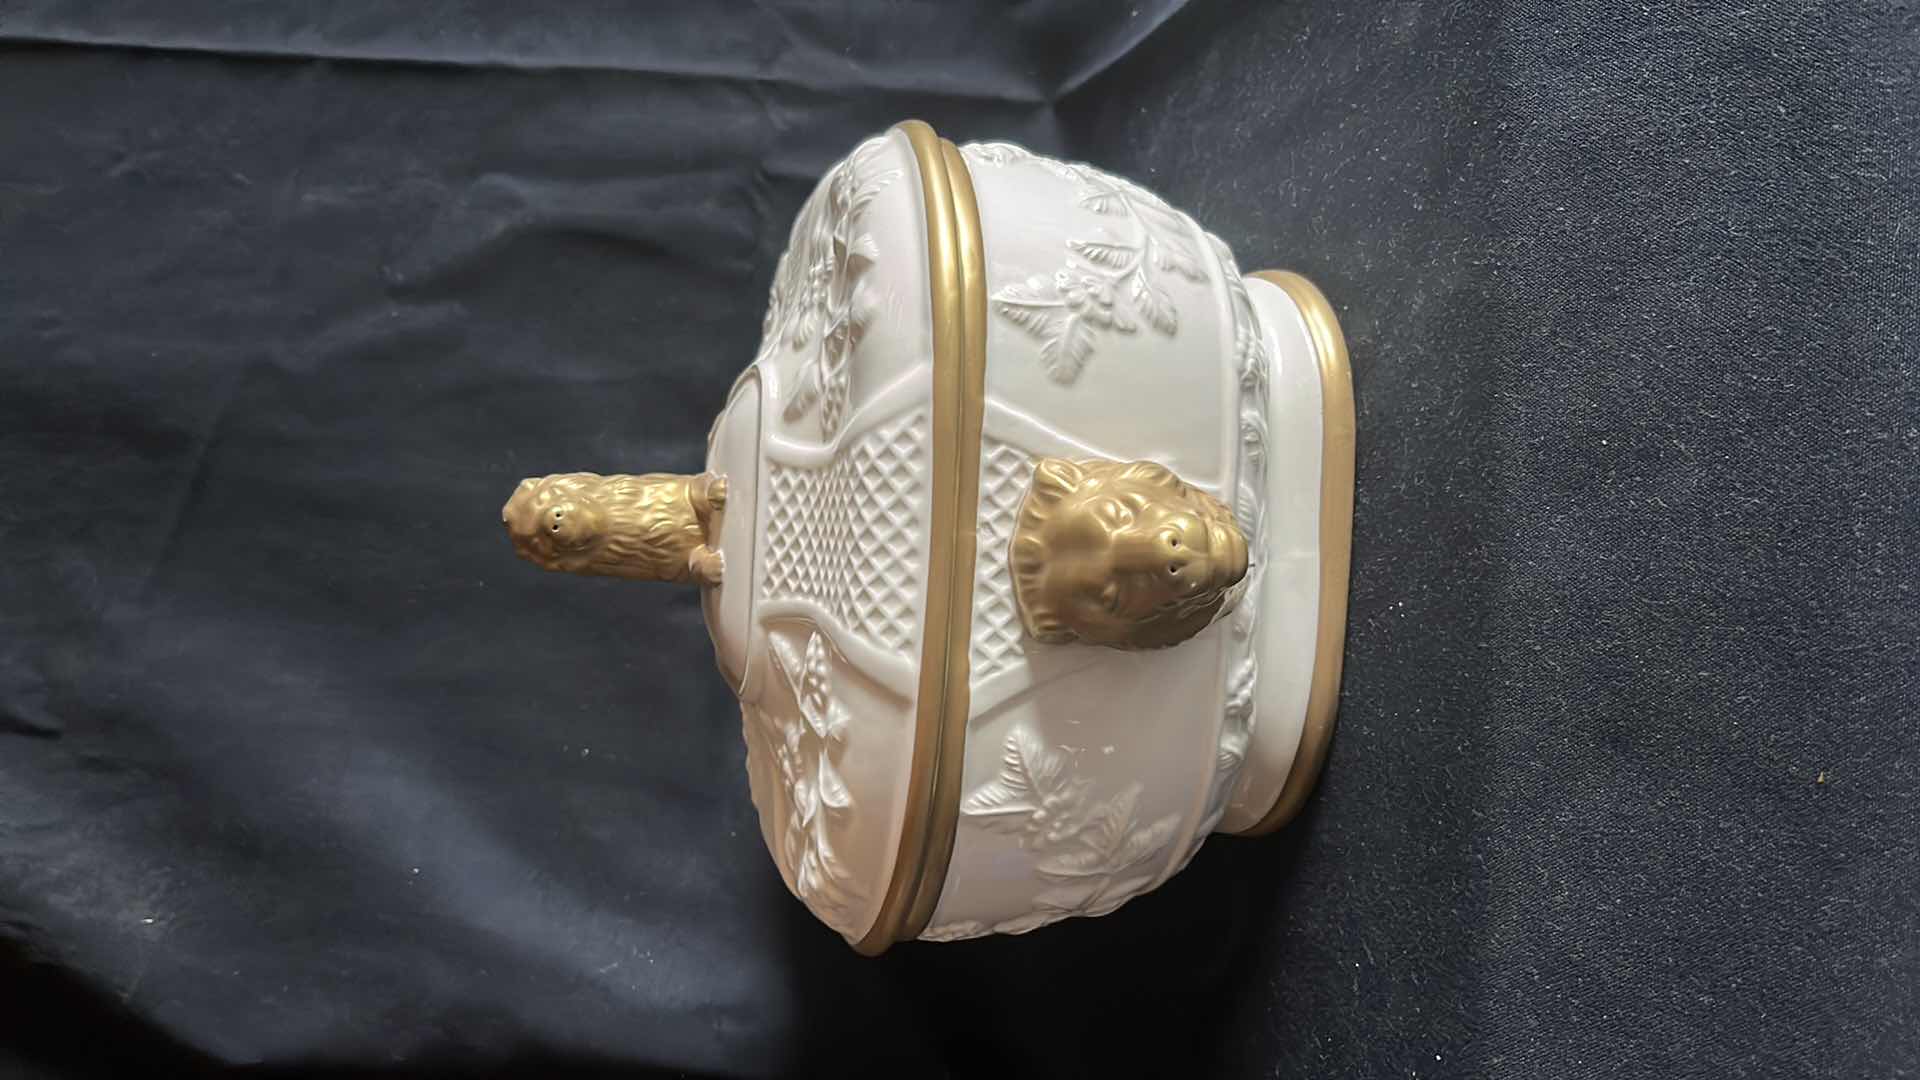 Photo 2 of MOTTAHEDEH MUSEE DES ARTS TUREEN AND LID PORCELAIN W GOLD TRIM MADE IN ITALY 9” X 14” X 9”